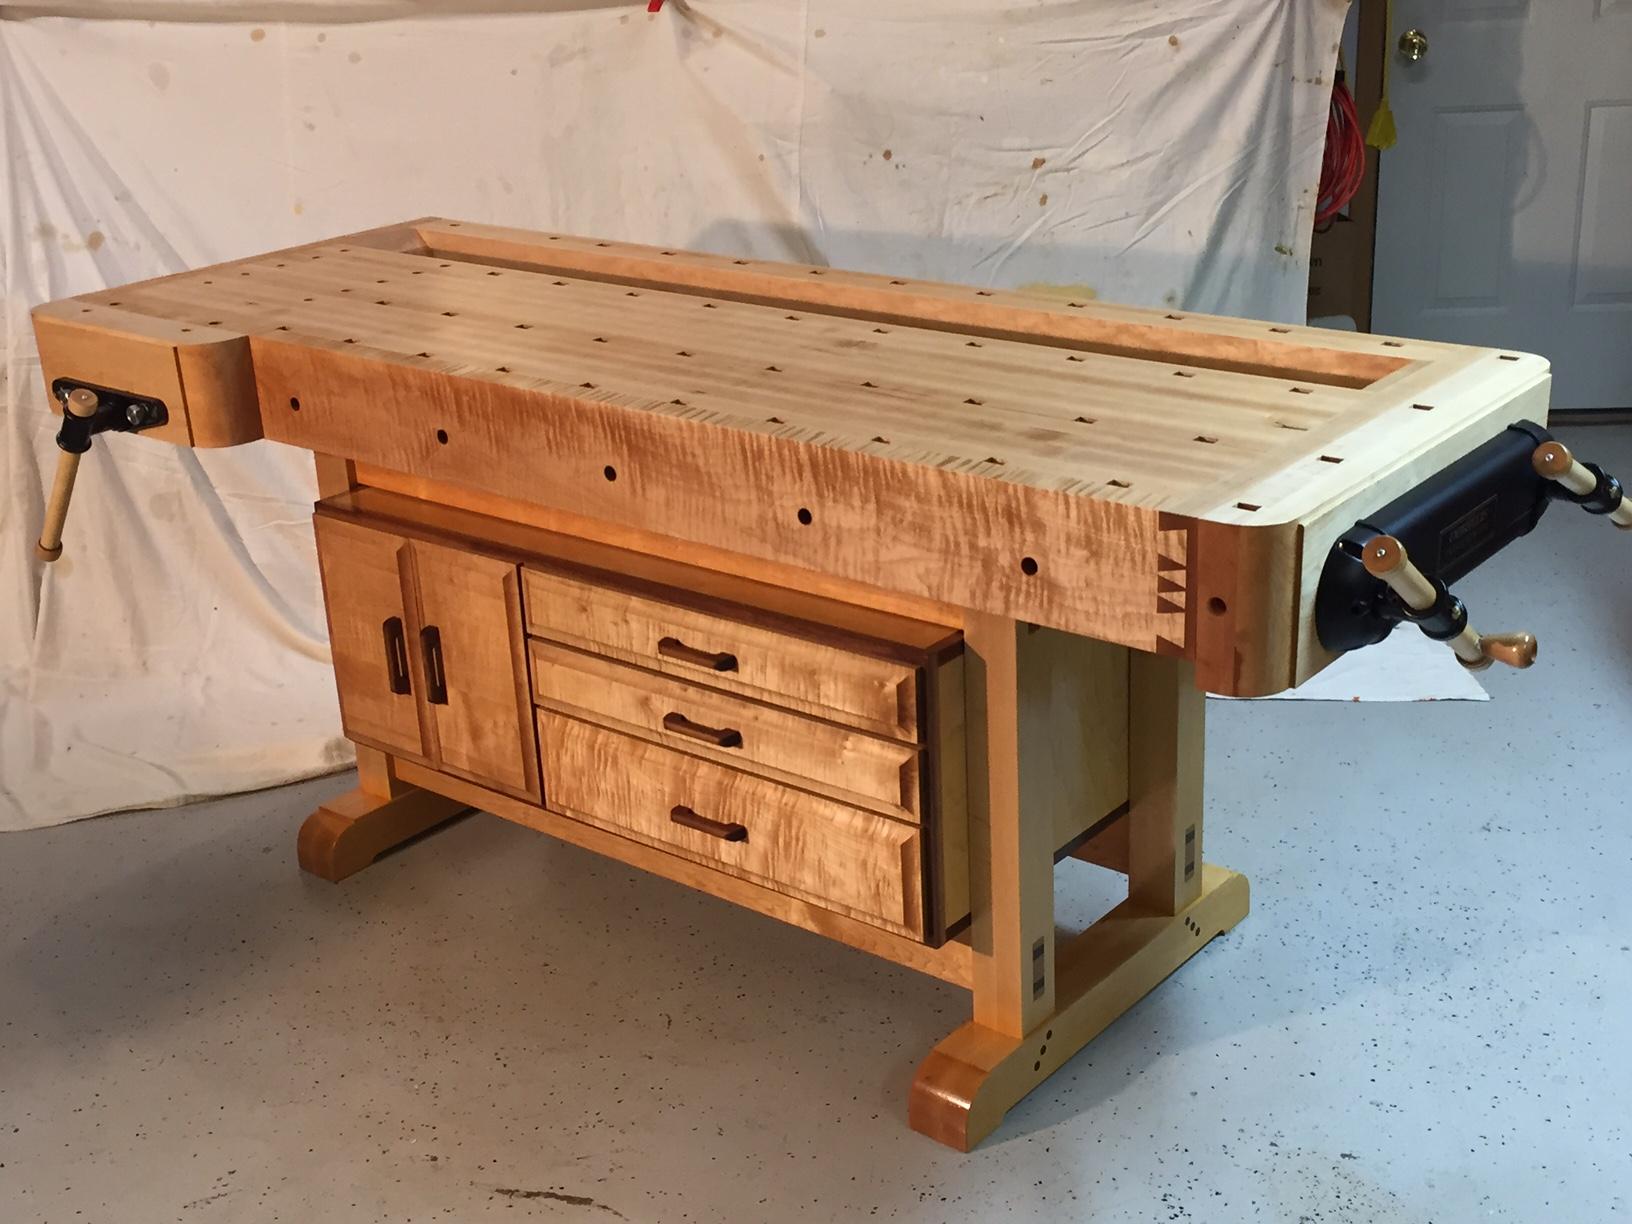 Woodworking Bench Introduction - Contentment Turnings